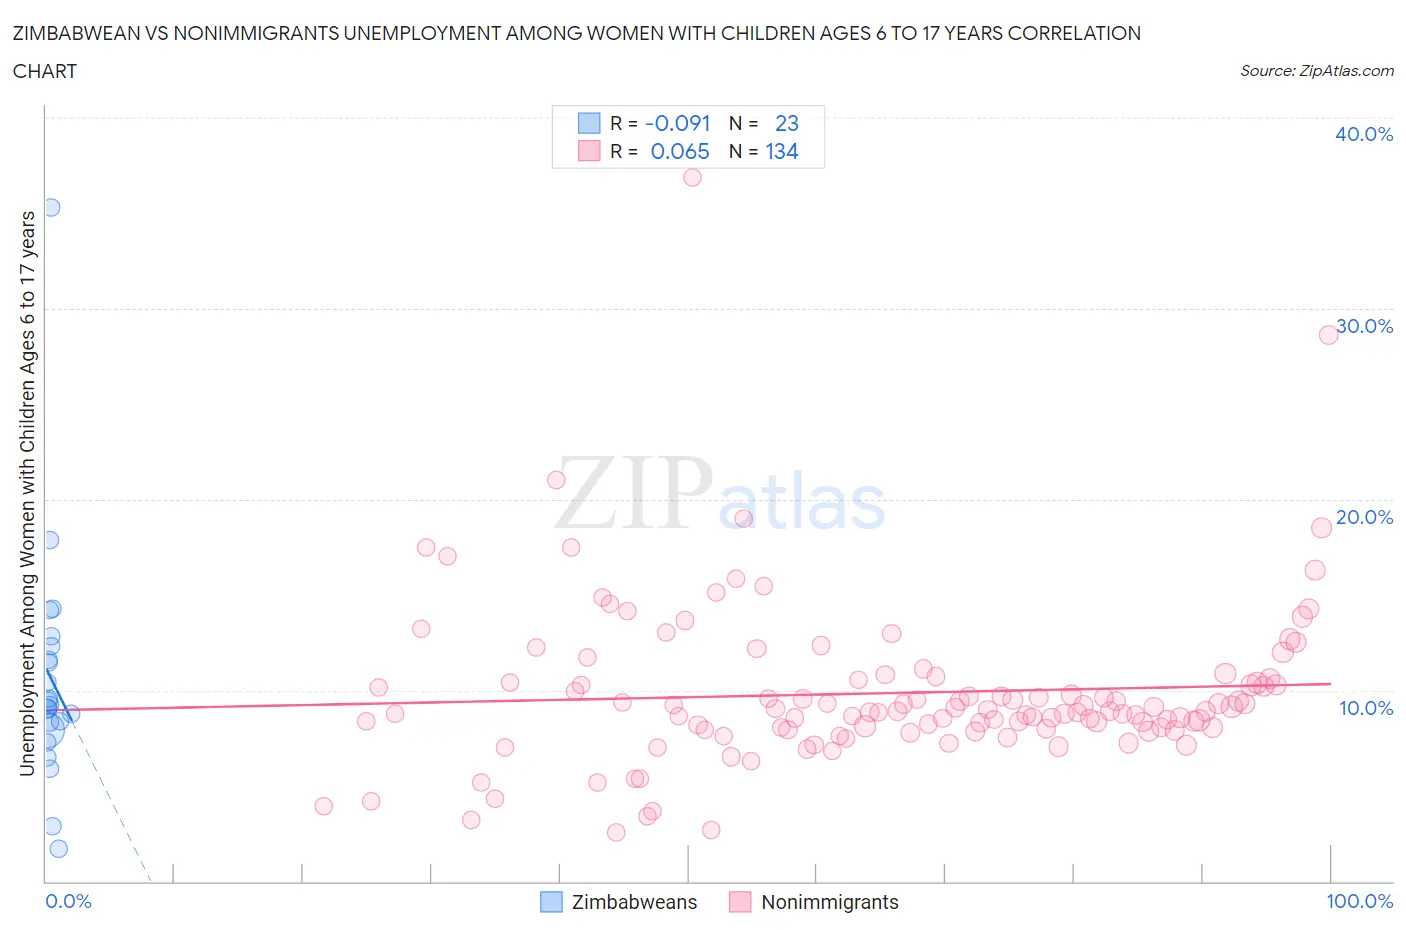 Zimbabwean vs Nonimmigrants Unemployment Among Women with Children Ages 6 to 17 years